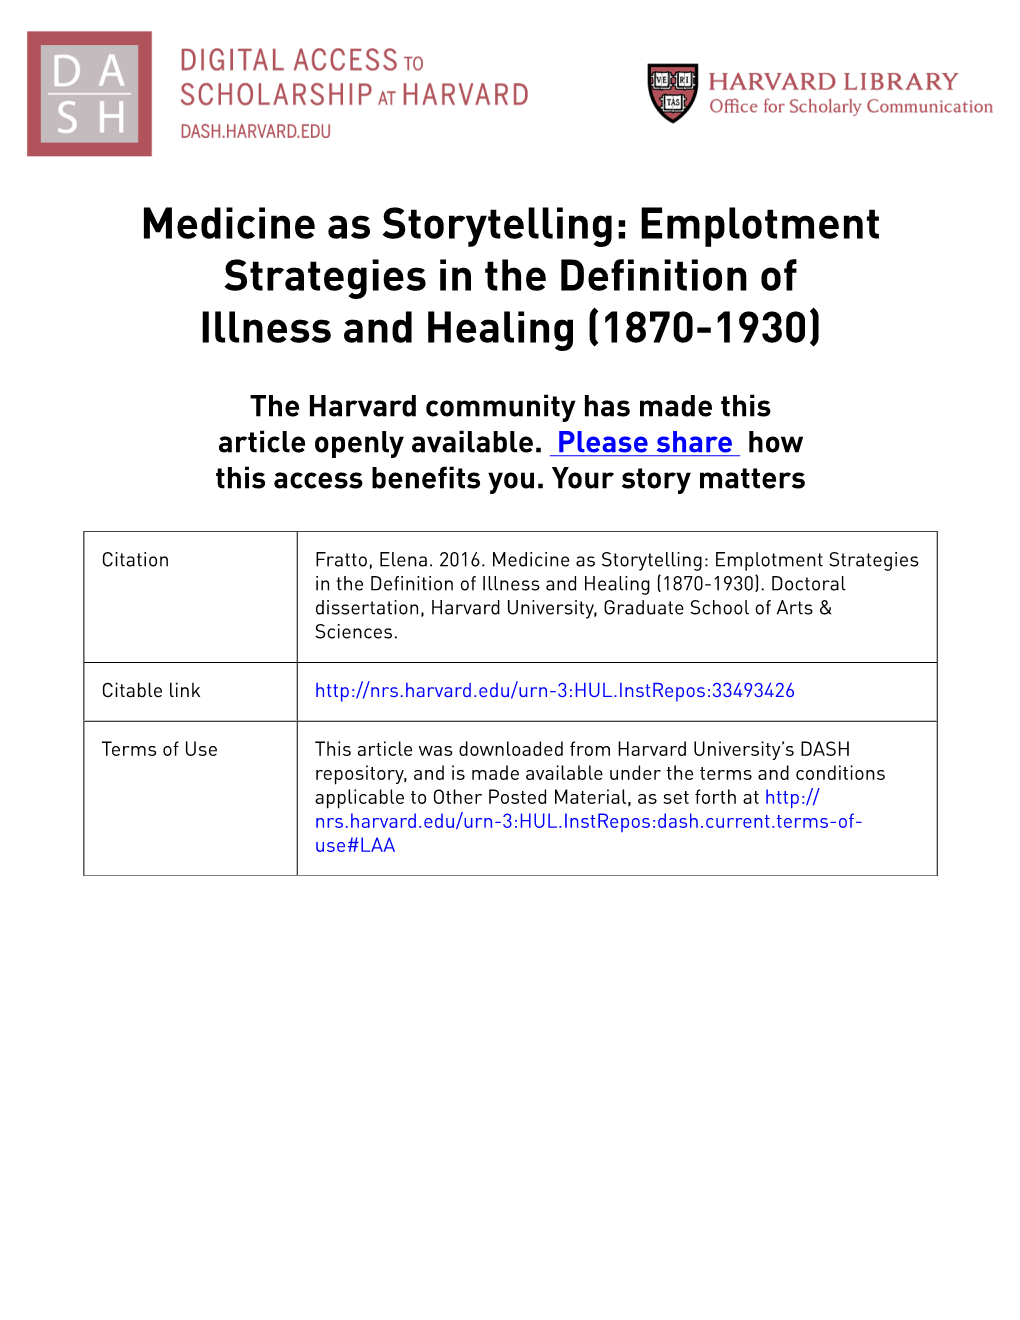 Medicine As Storytelling: Emplotment Strategies in the Definition of Illness and Healing (1870-1930)